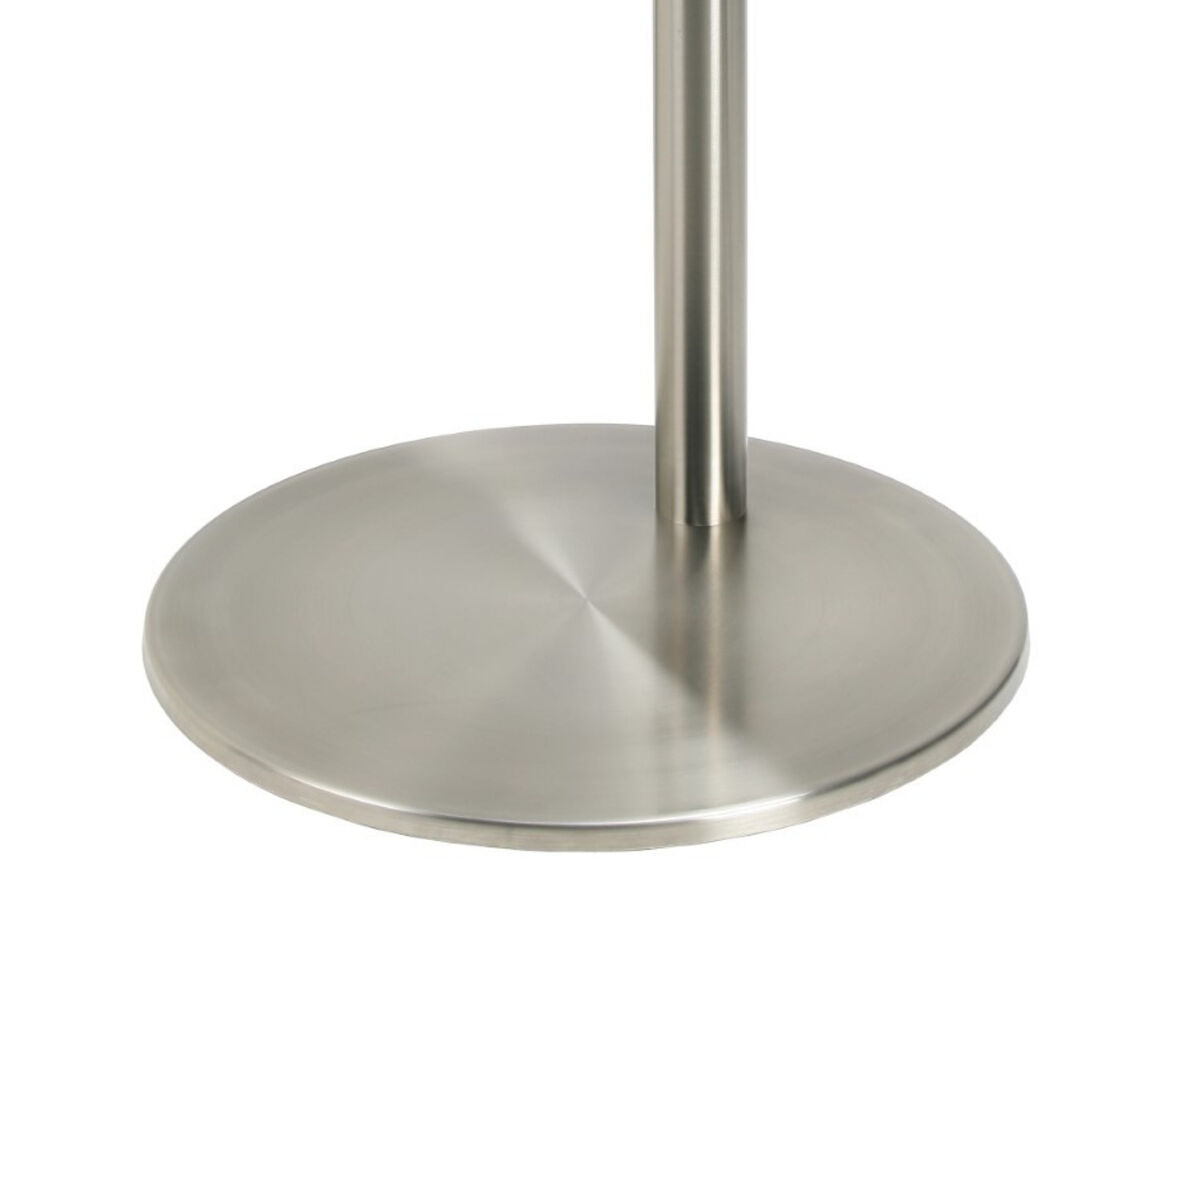 Stand Cavus Stainless steel, Cavus, Electronics, Audio and Hi-Fi equipment, stand-cavus-stainless-steel, Brand_Cavus, category-reference-2609, category-reference-2637, category-reference-2882, category-reference-t-19653, category-reference-t-19899, category-reference-t-21329, category-reference-t-25554, category-reference-t-7441, cinema and television, Condition_NEW, music, Price_200 - 300, RiotNook